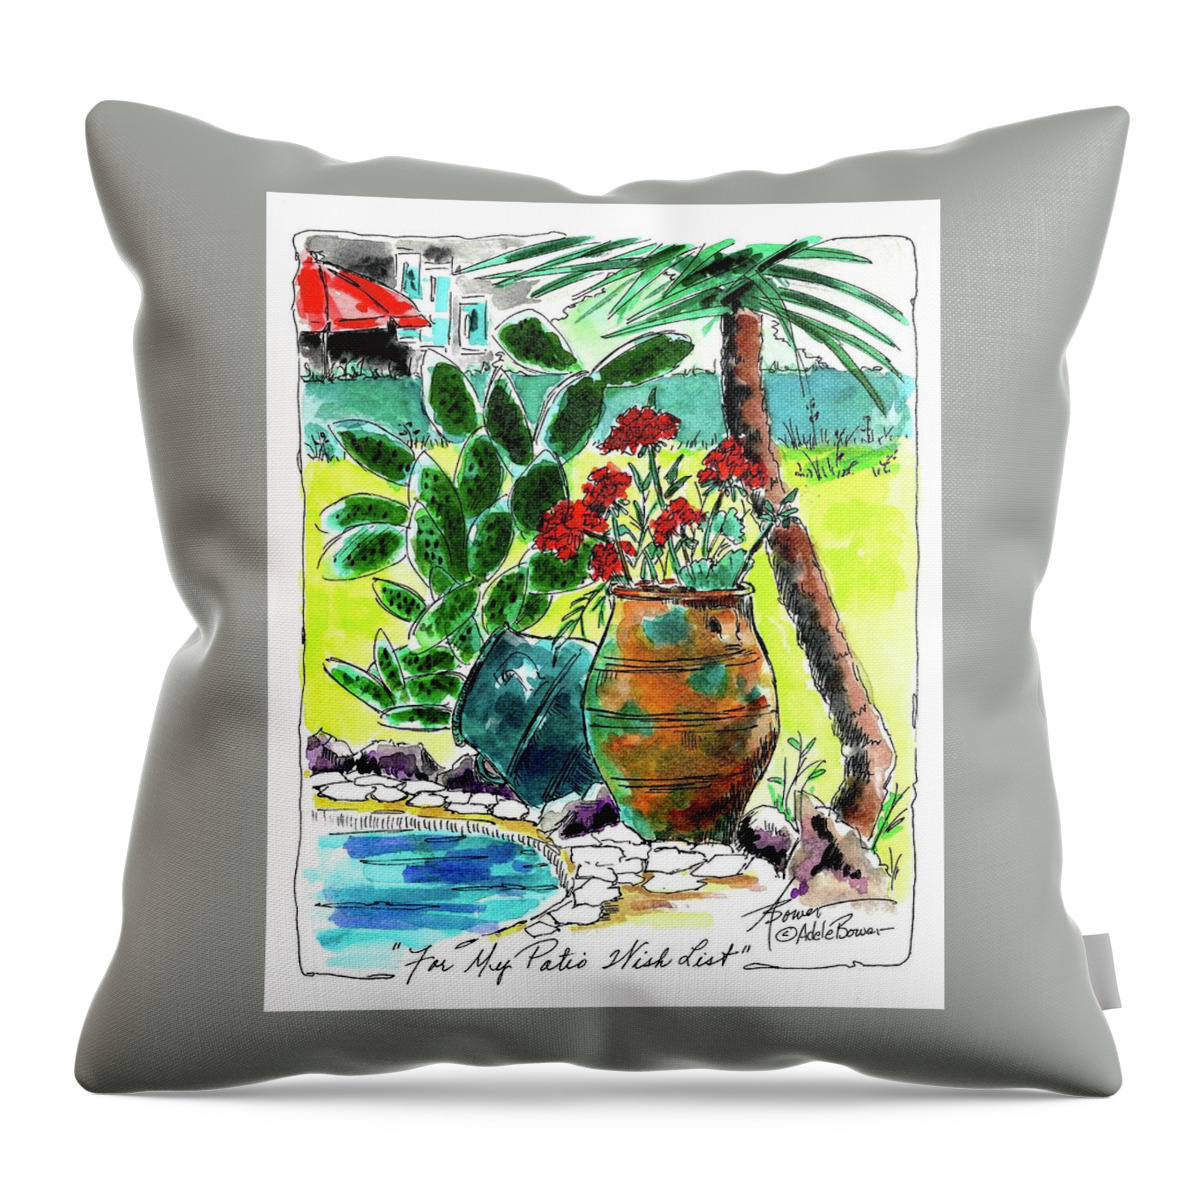 Cactus Throw Pillow featuring the painting For My Patio Wish List by Adele Bower